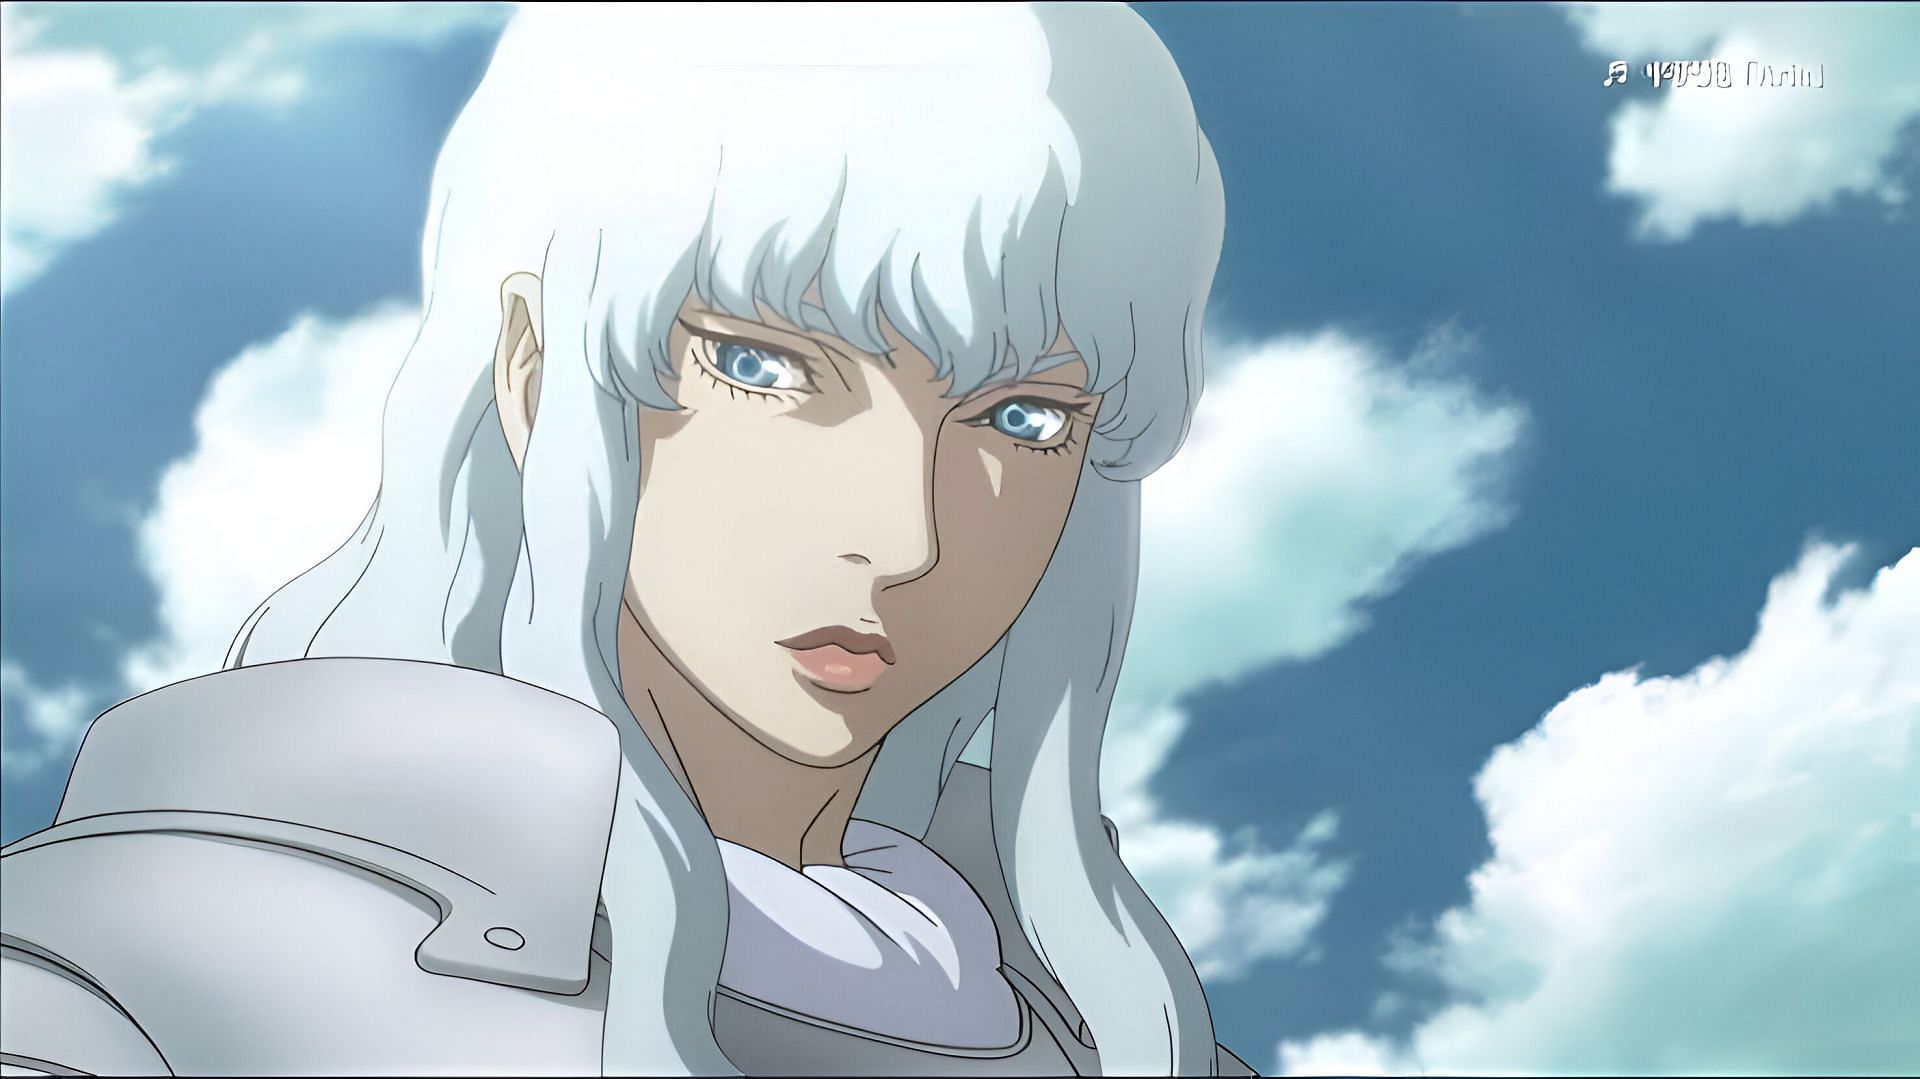 Griffith as seen in the anime (Image via Studio 4C)